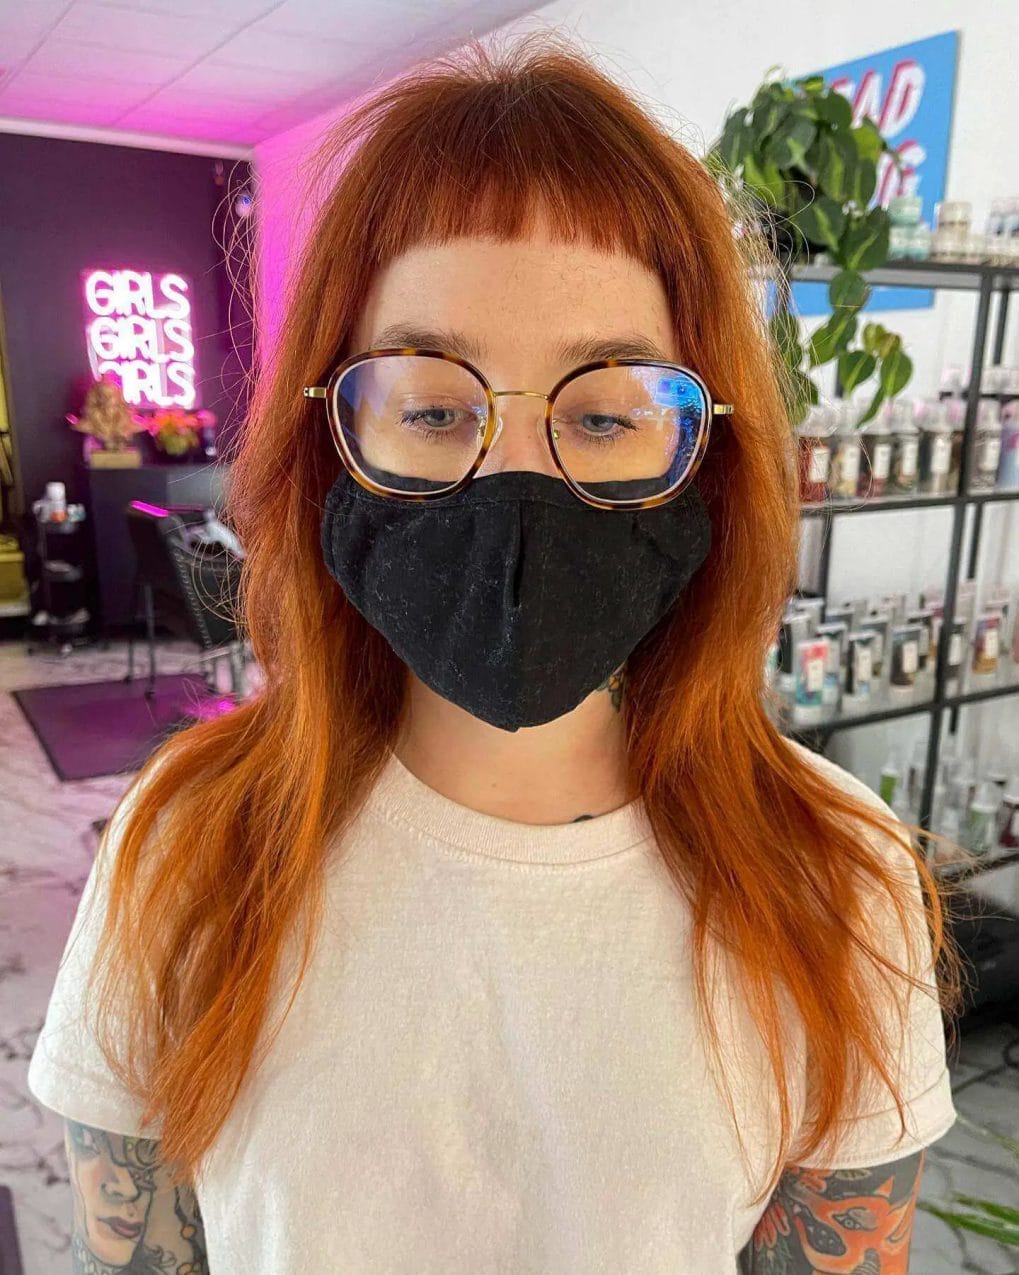 Shoulder-length fiery copper hair with straight fringe and bold glasses frames.